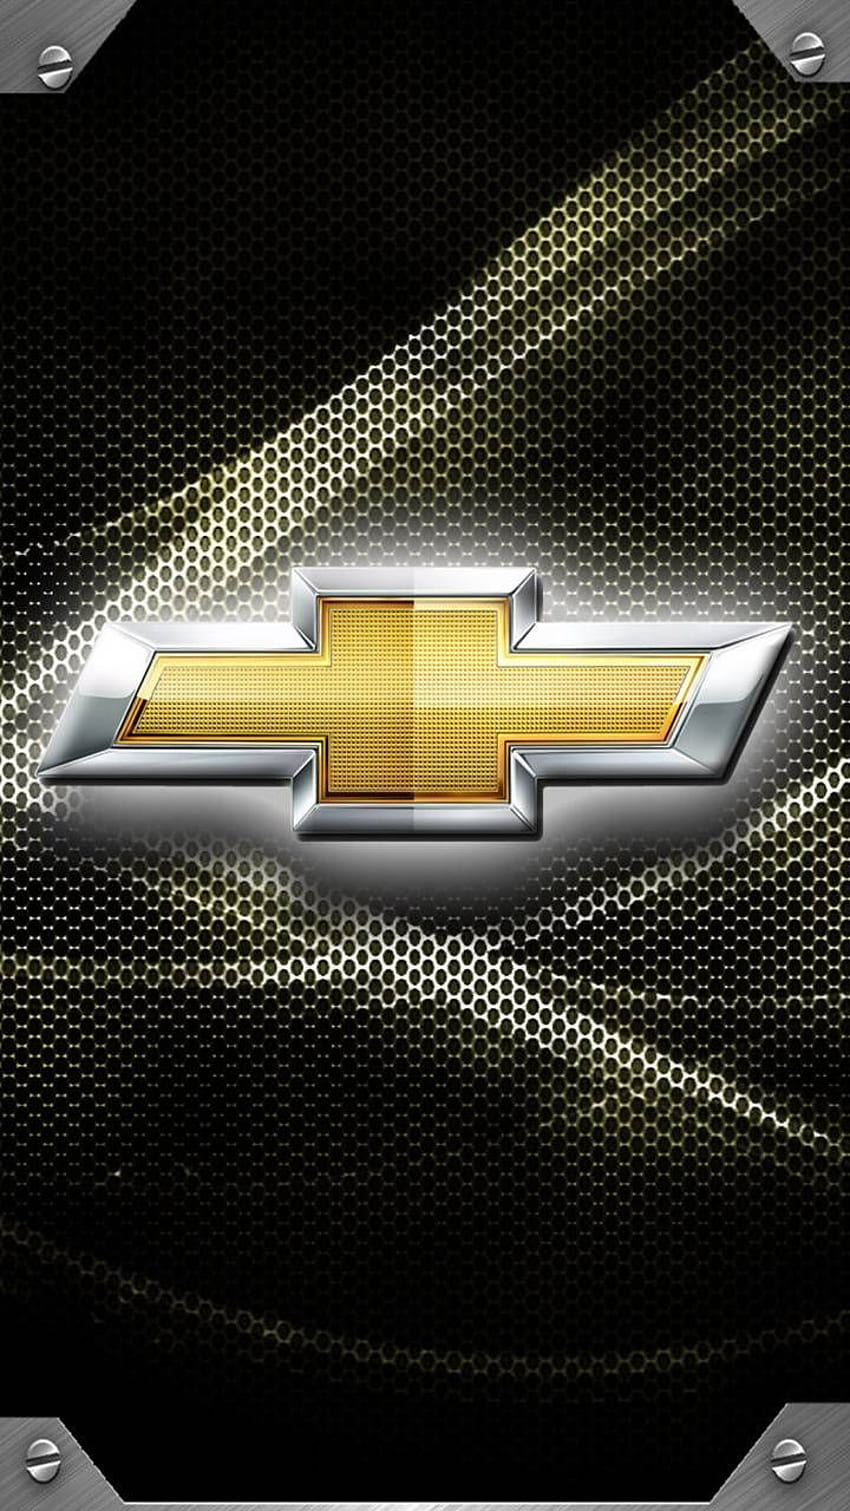 Chevy Love by Jansingjames - 17 now. Browse millions of popular and. Chevrolet , Chevy, Chevrolet aveo, Chevrolet Logo HD phone wallpaper